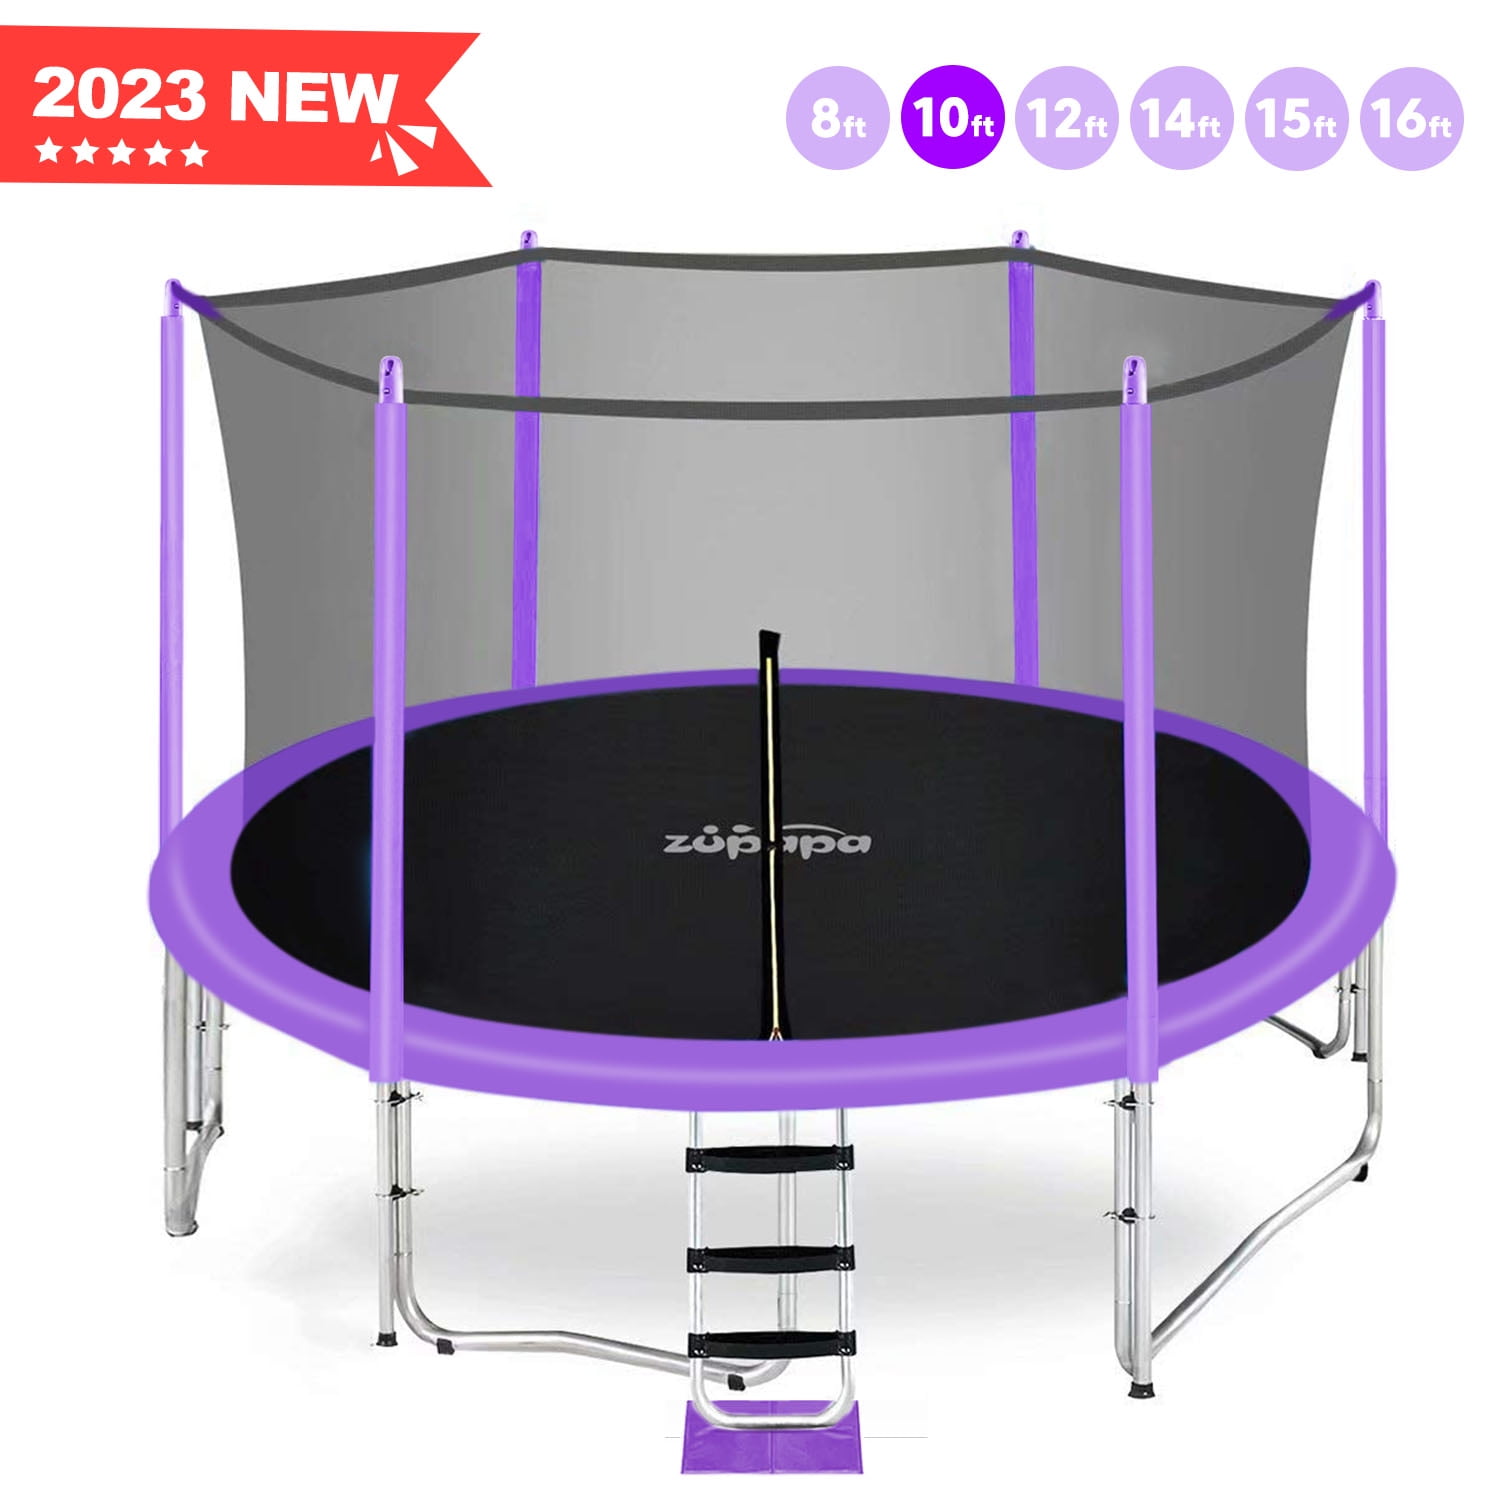 Zupapa 15FT 14FT 12FT 10FT Trampoline 425LBS Weight Capacity with Enclosure net Include All Accessories Outdoor Backyard - Walmart.com